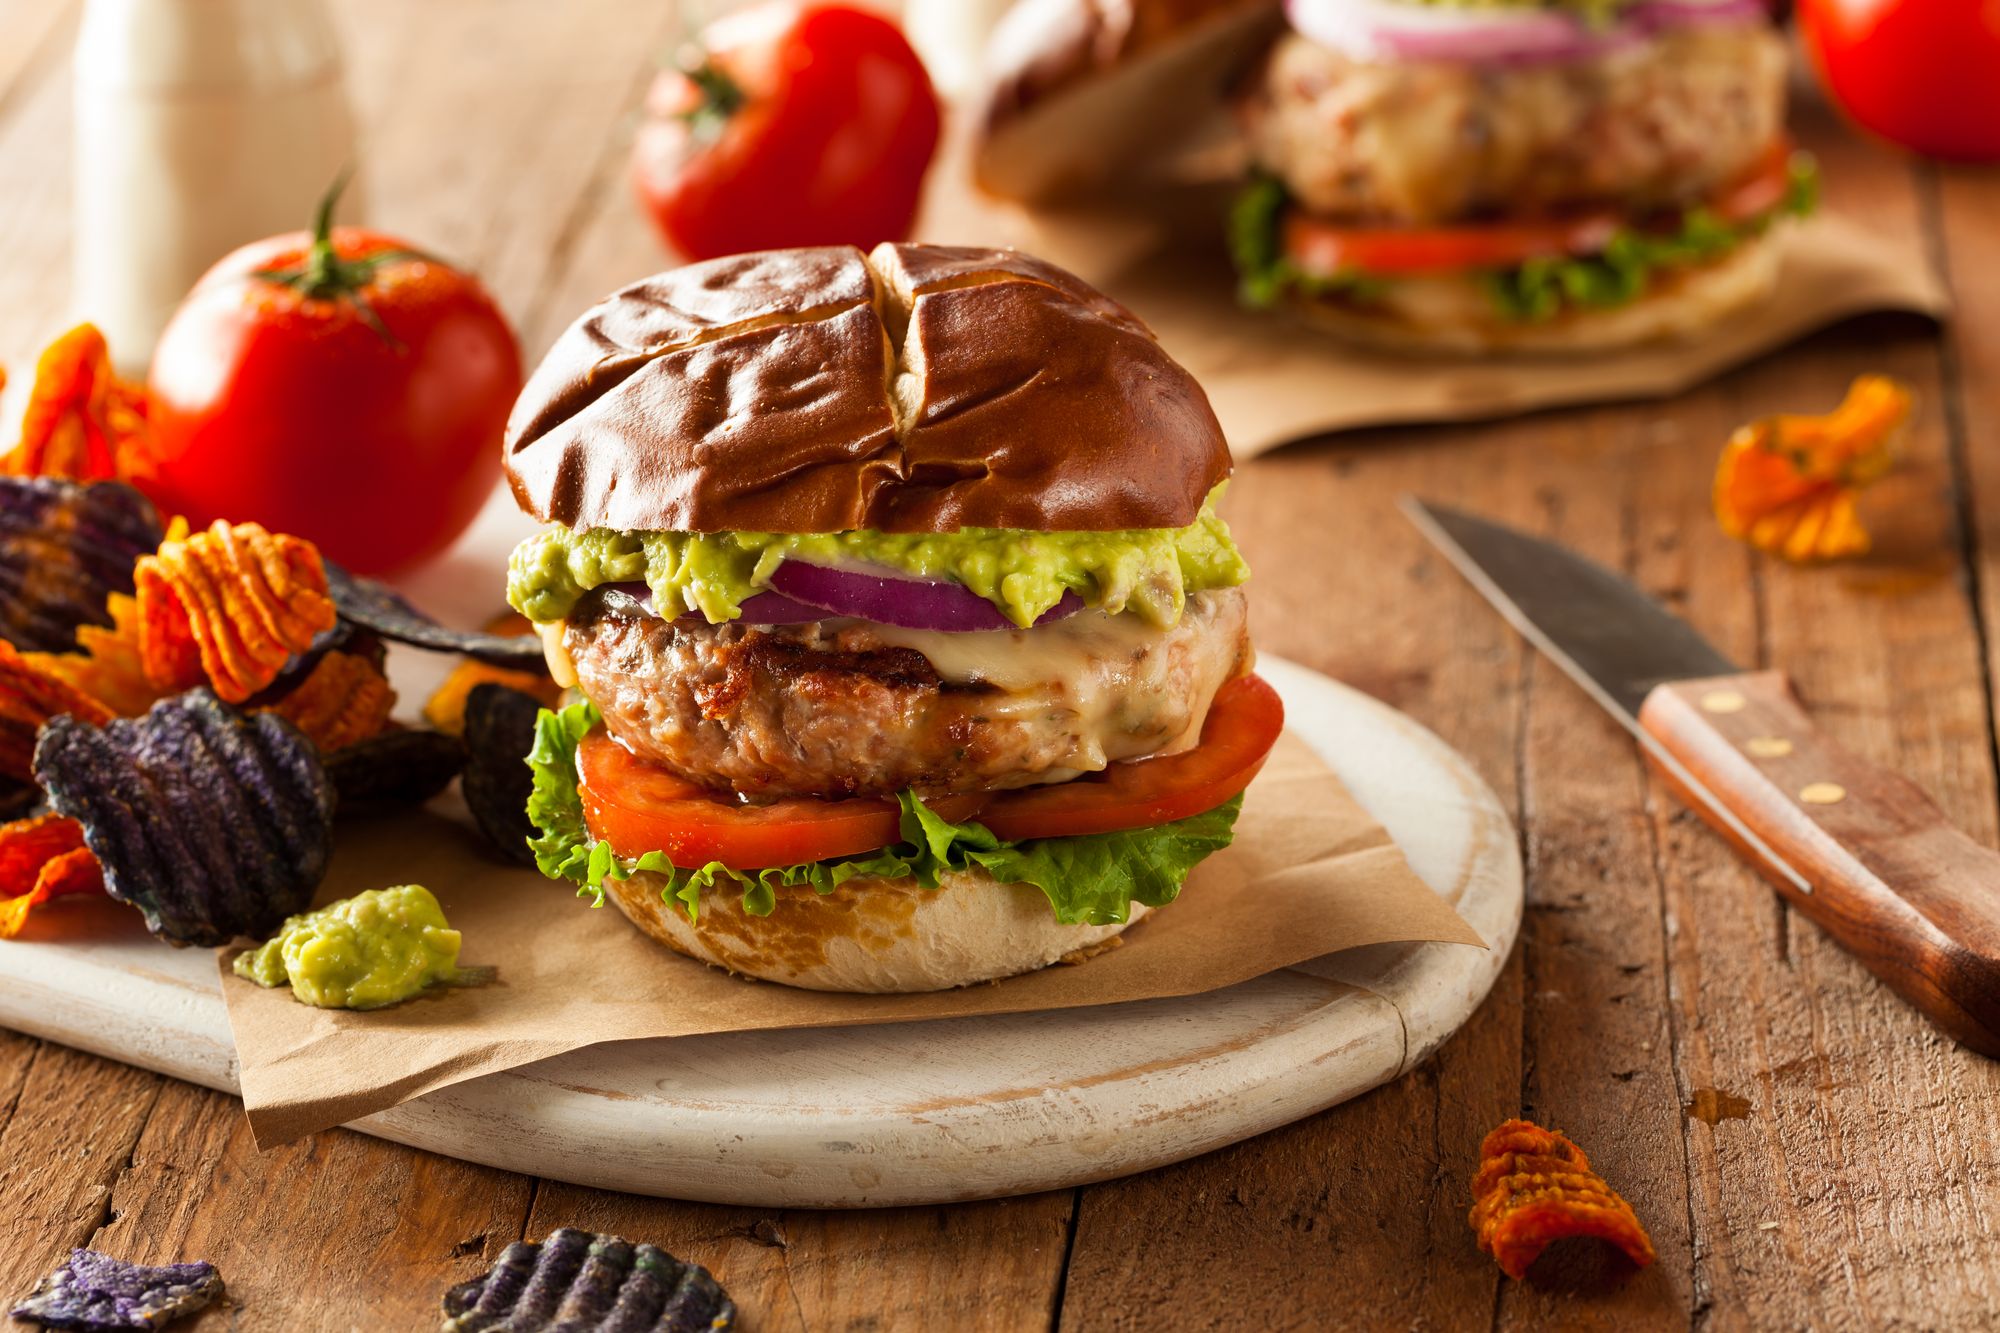 Turkey, Peppers and Hummus Burgers